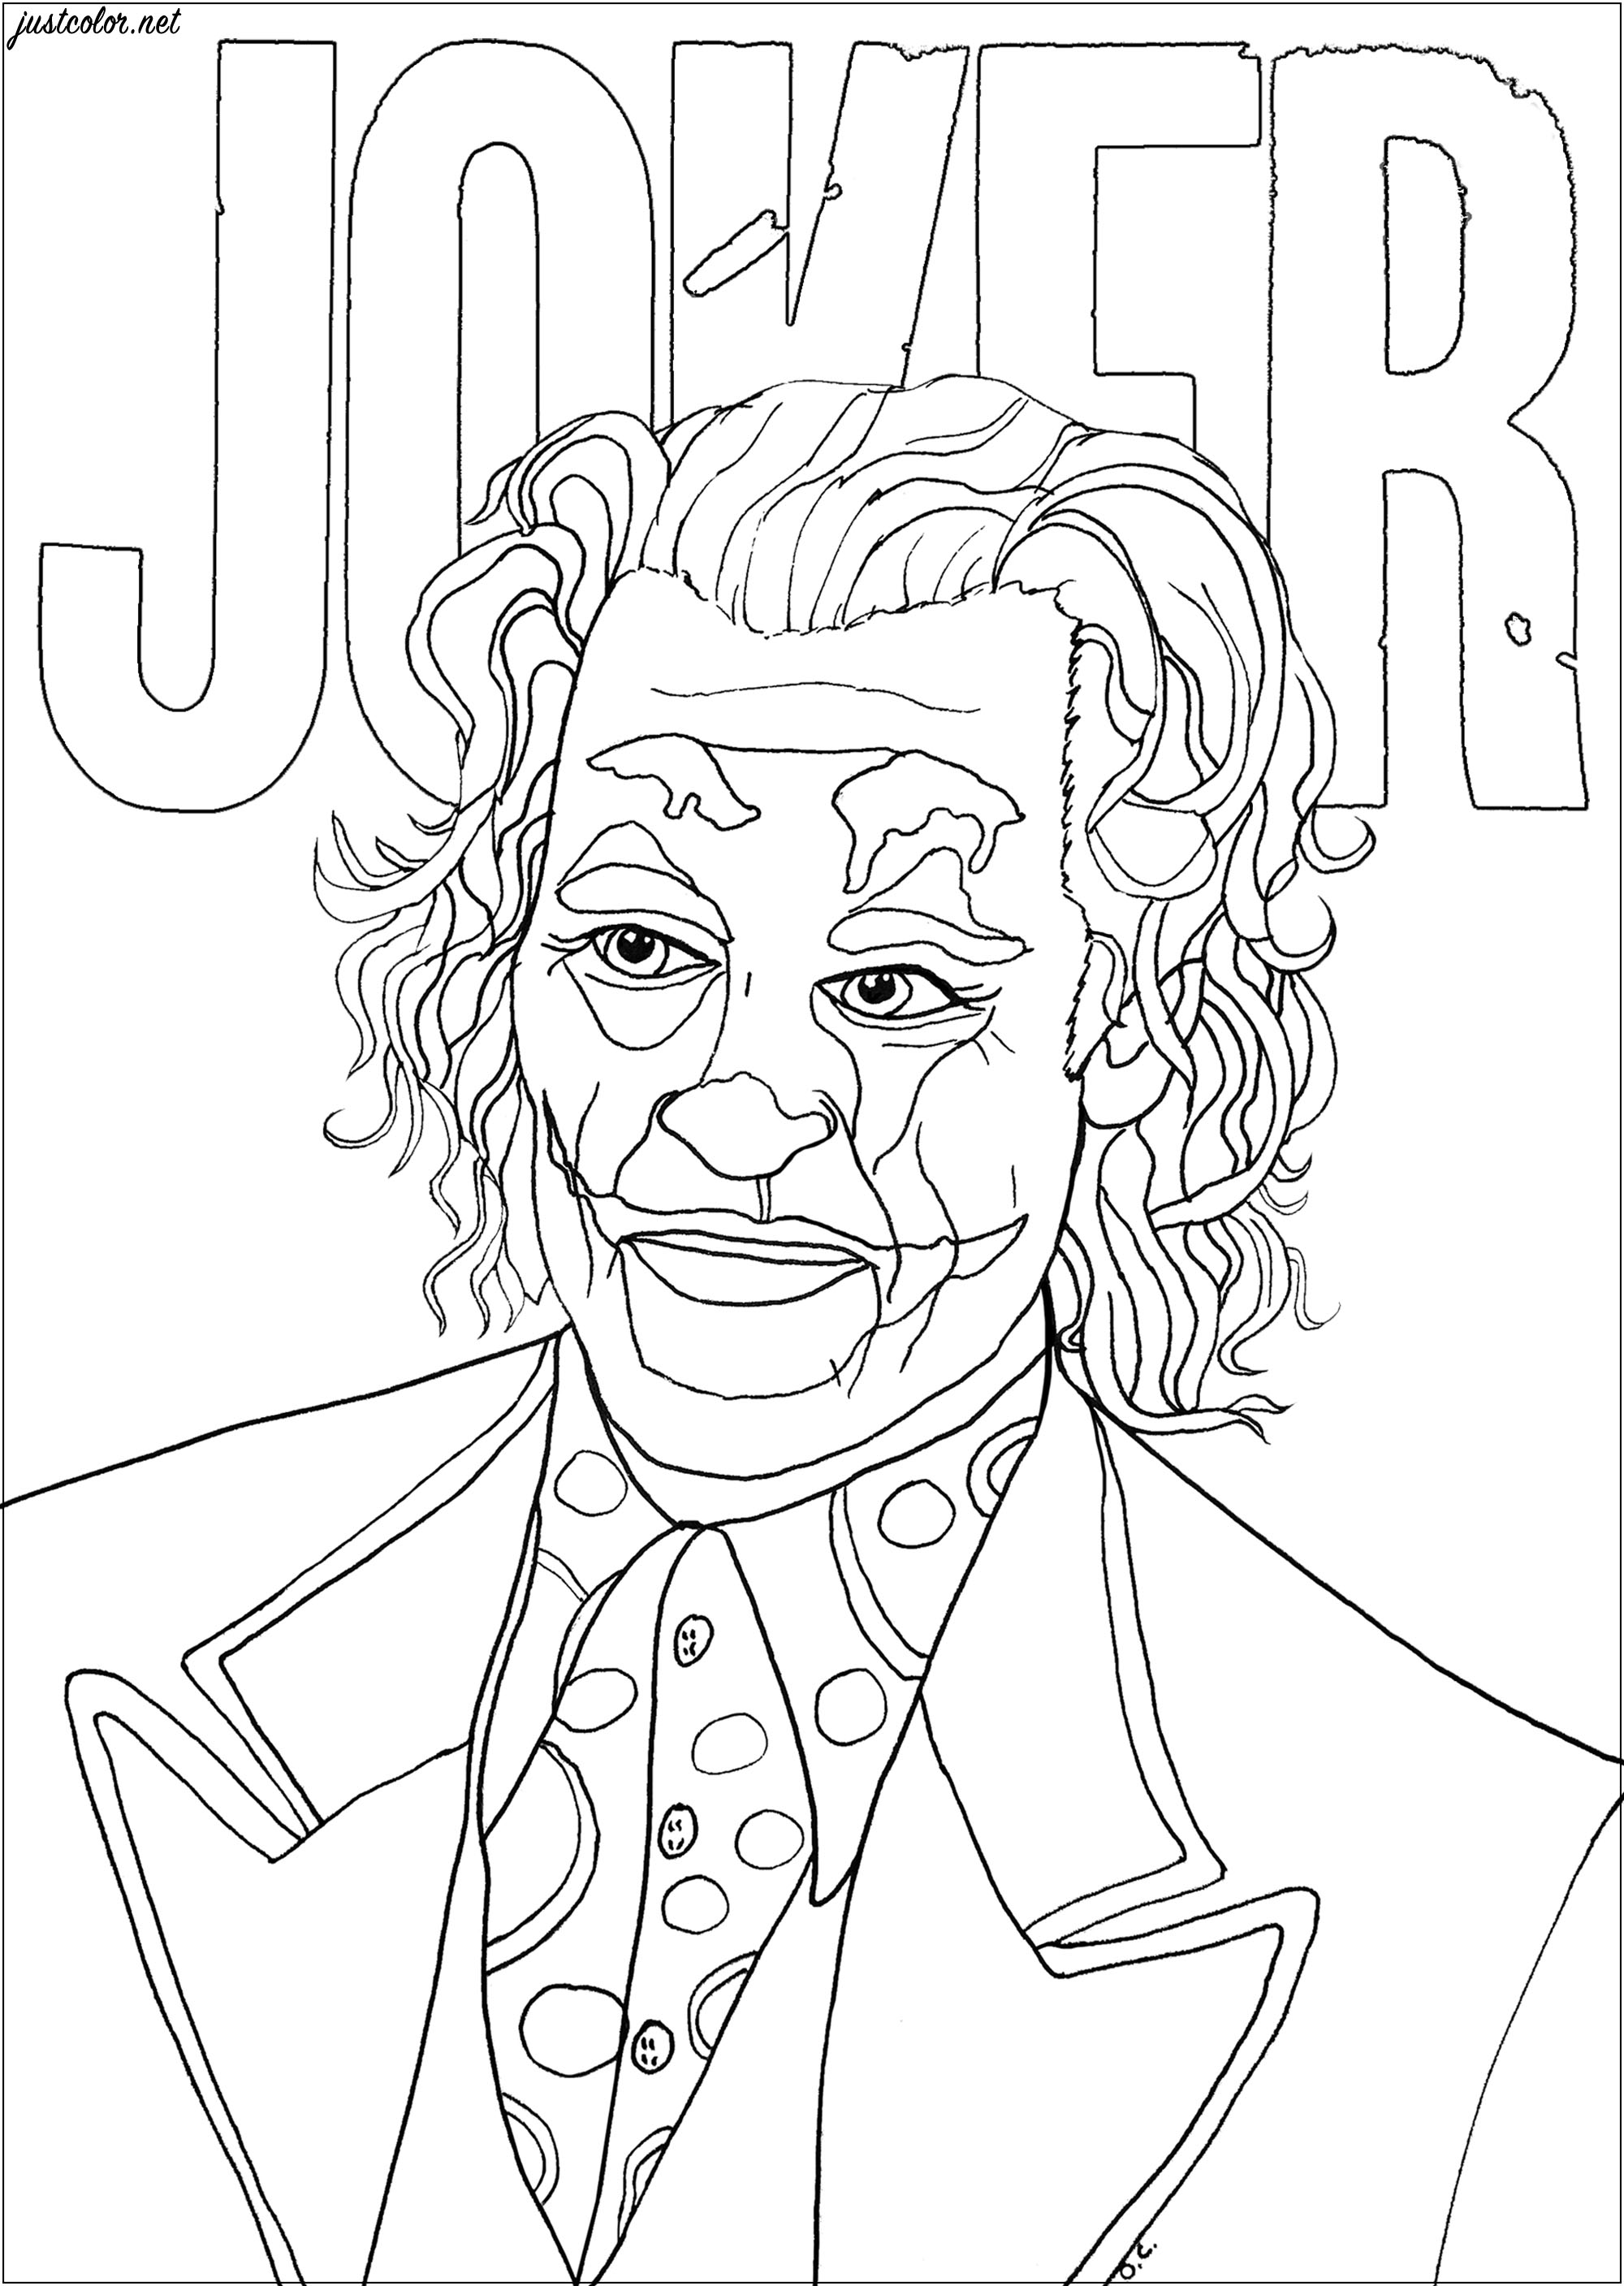 Joker (Joaquin Phoenix) - Movies Adult Coloring Pages